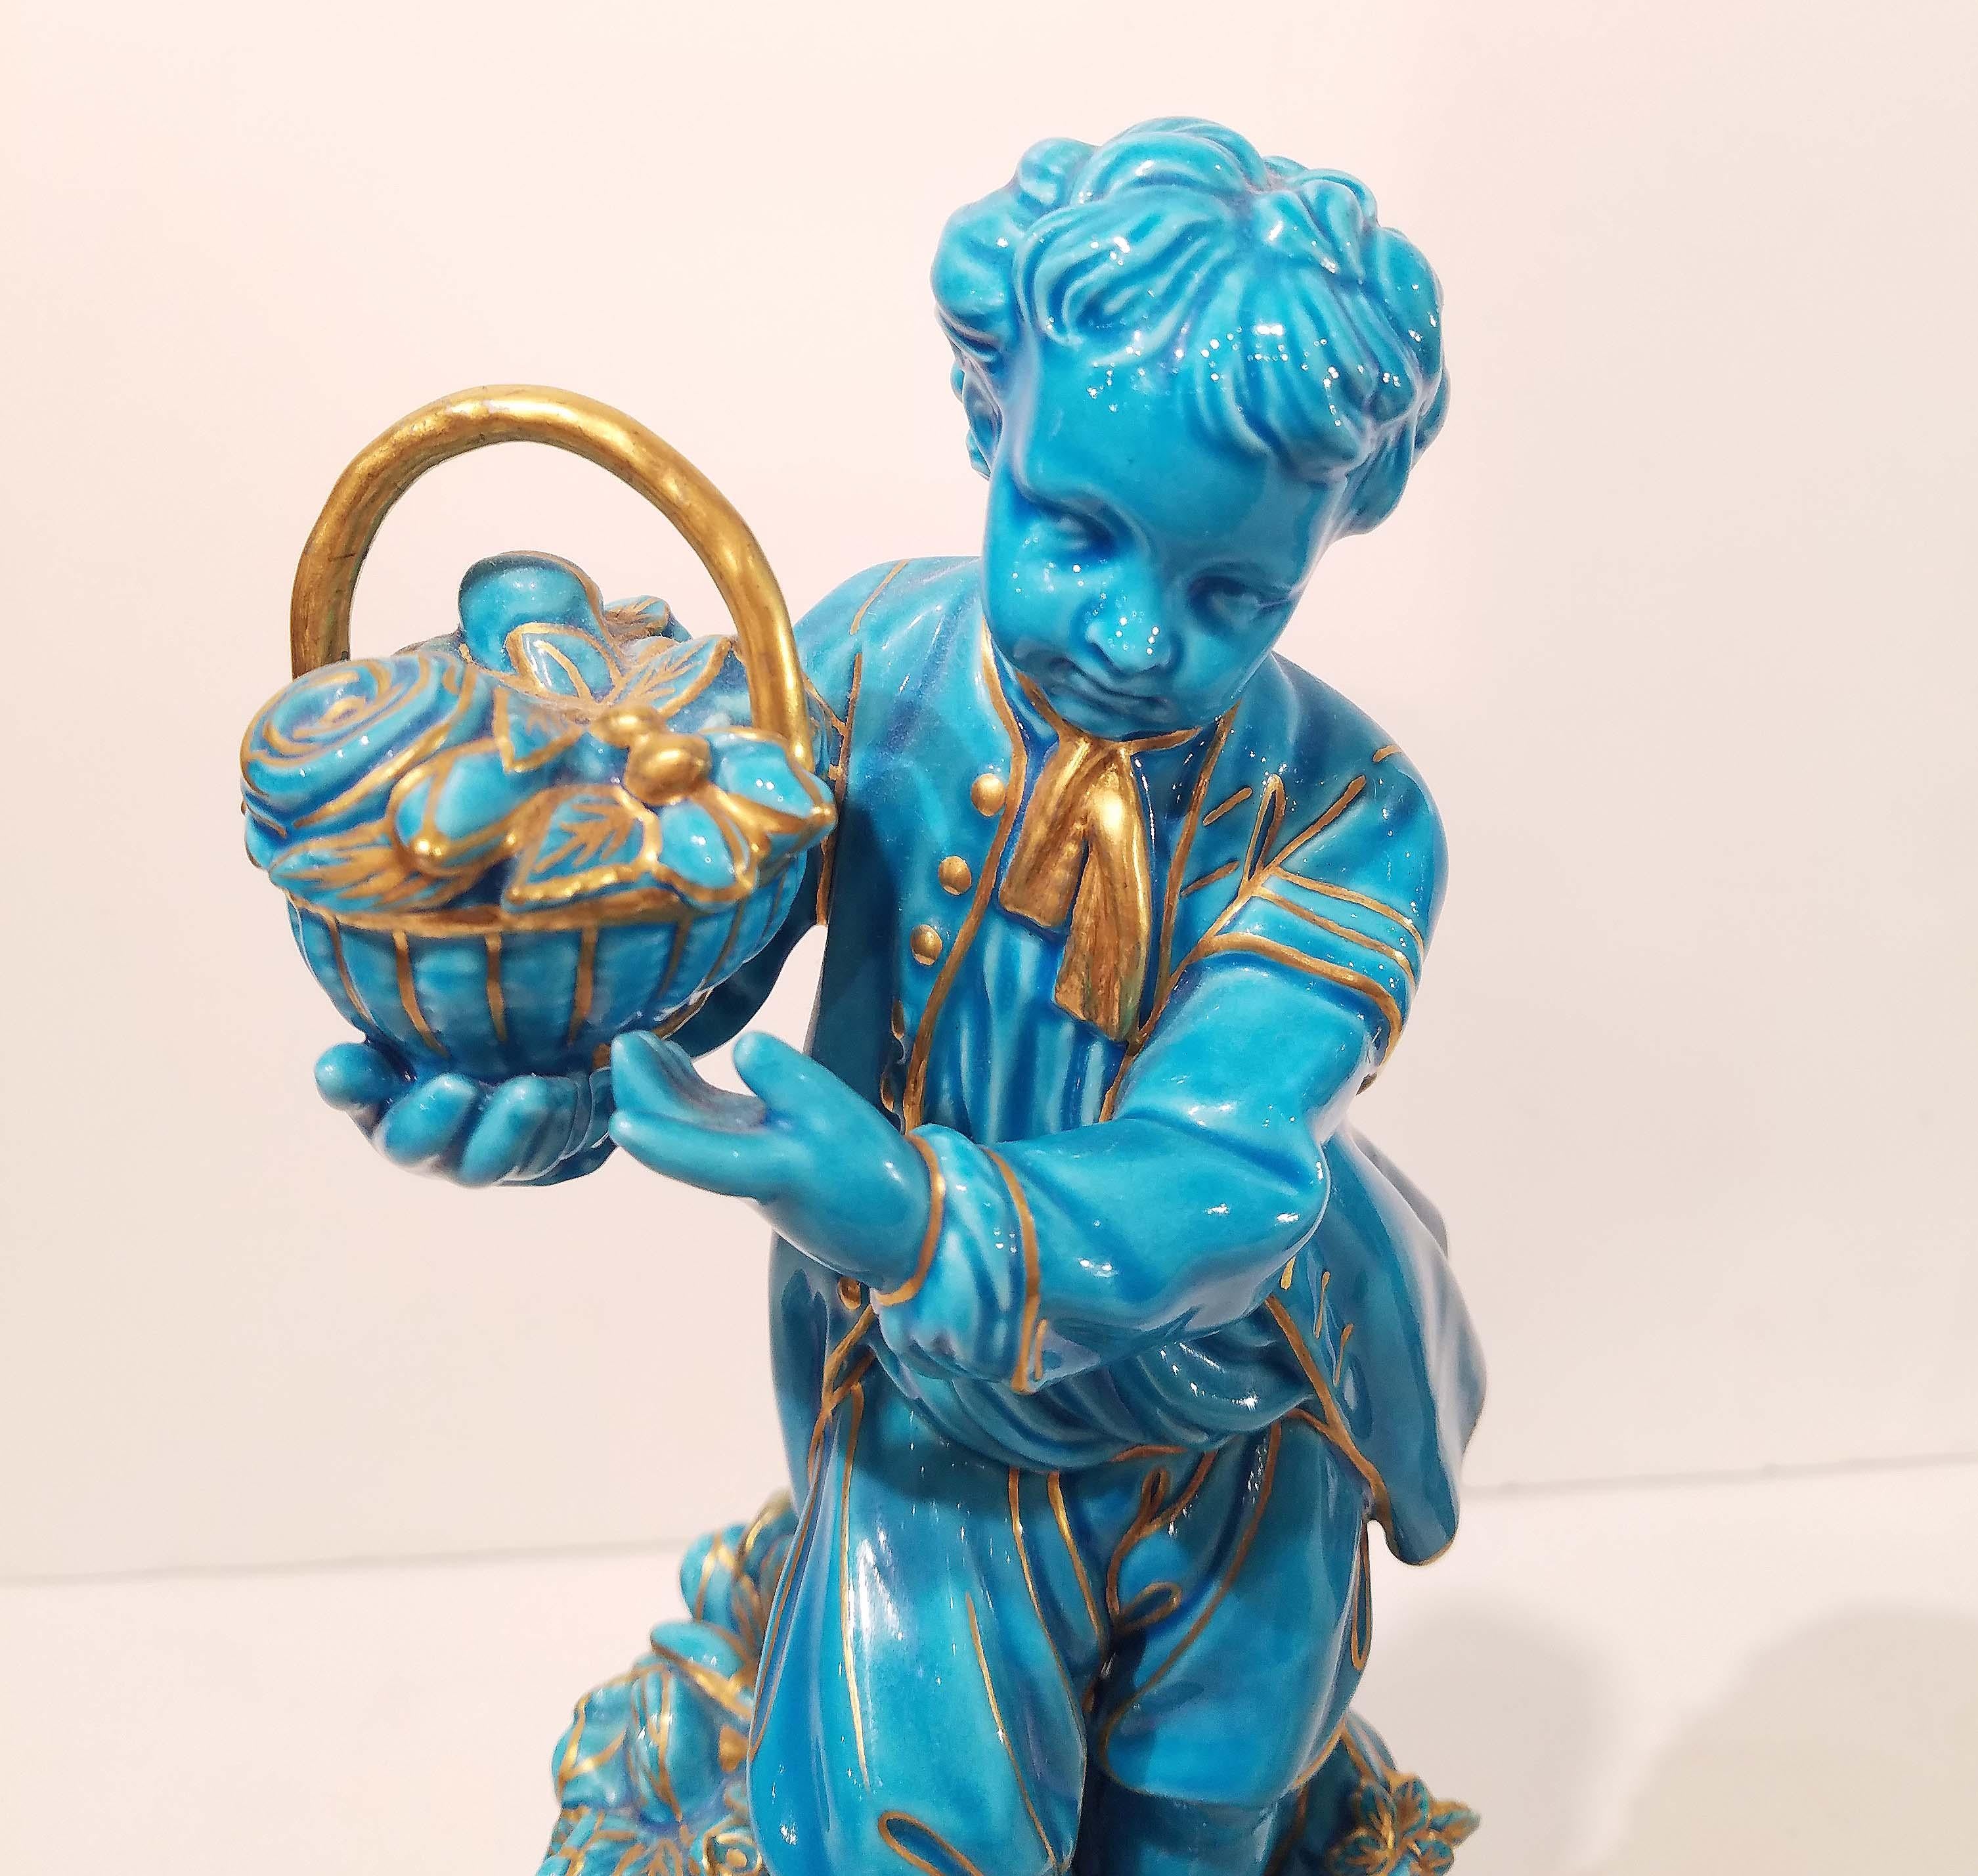 French Pair of Sevres Style Porcelain Turquoise-Glazed Figures, 19th Century